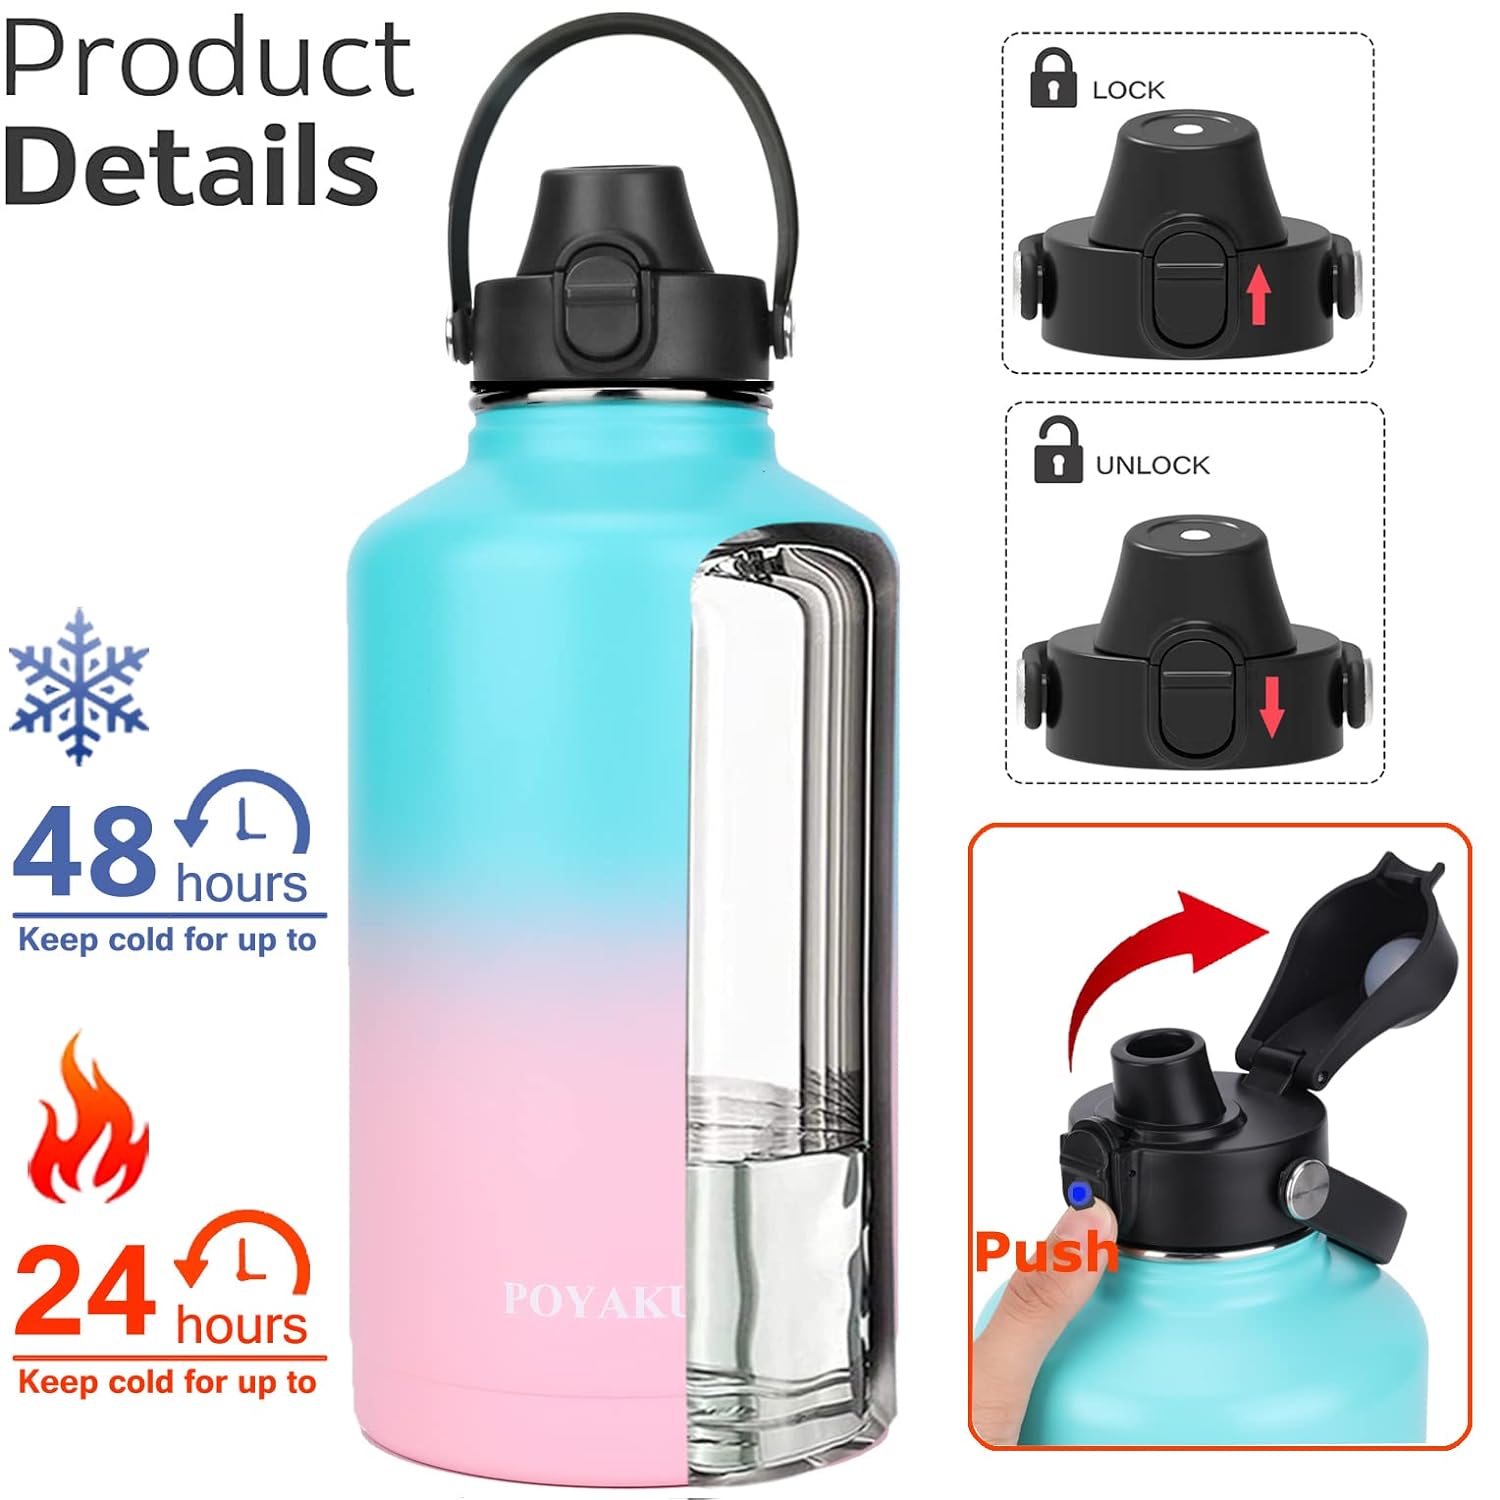 Water Bottle Insulated 64 oz- Straw lid and Auto Spout lid , Leak Proof, Vacuum Insulated, Large Metal Stainless Steel Water Jug Half Gallon Wide Mouth for Sports, Gym, Keep Cold 48H Hot 24H